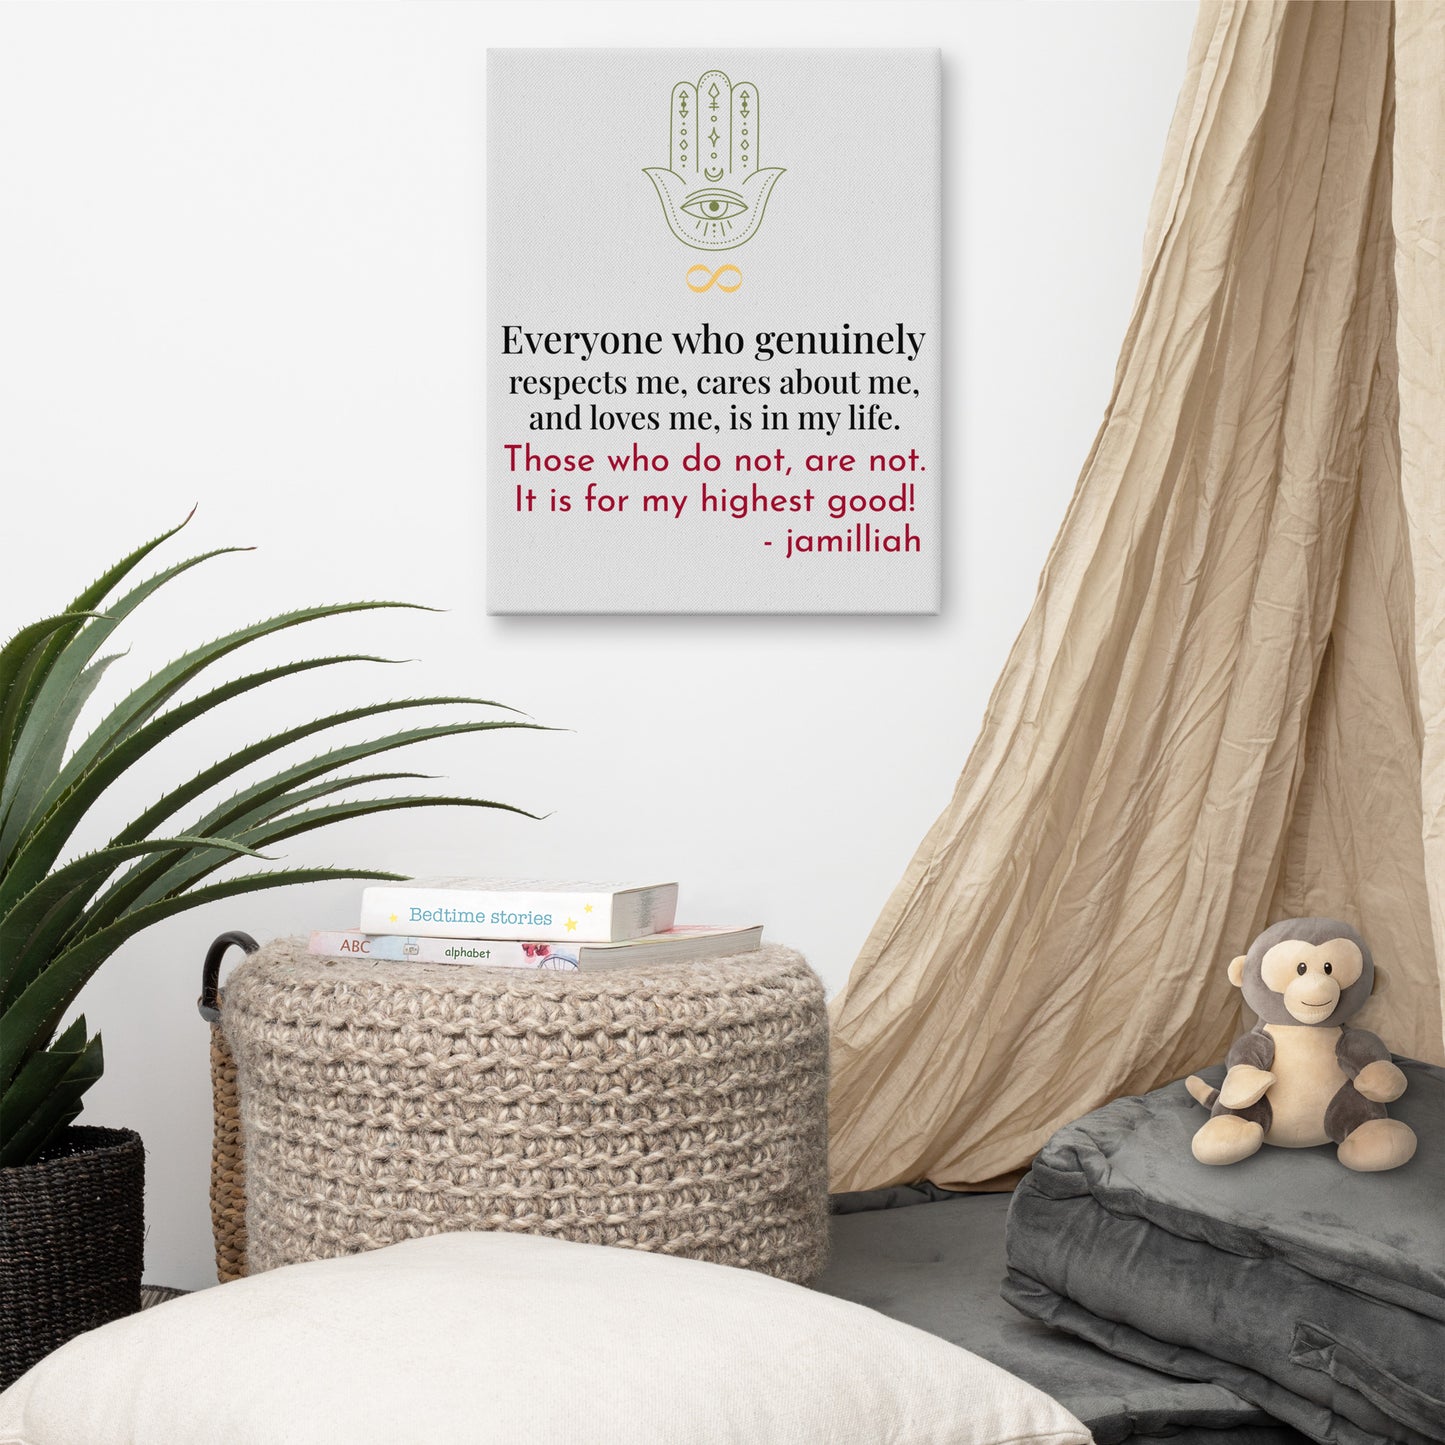 Whisper white/grey, 12x16 inch canvas print wall art. Vertical presentation. Spiritual, supernatural green hamsa hand and yellow infinity sign logo images. Original wise quote, mantra, slogan, saying; written in black and red. "Everyone Who Genuinely Respects Me, Cares About Me, And Loves Me, Is In My Life. Those Who Do Not, Are Not. It Is For My Highest Good!" - Jamilliah - Shown on white wall, surrounded by a plant, books, curtain, and furniture. JAMILLIAH'S WISDOM IS TIMELESS SHOP - wisdomistimeless.com.